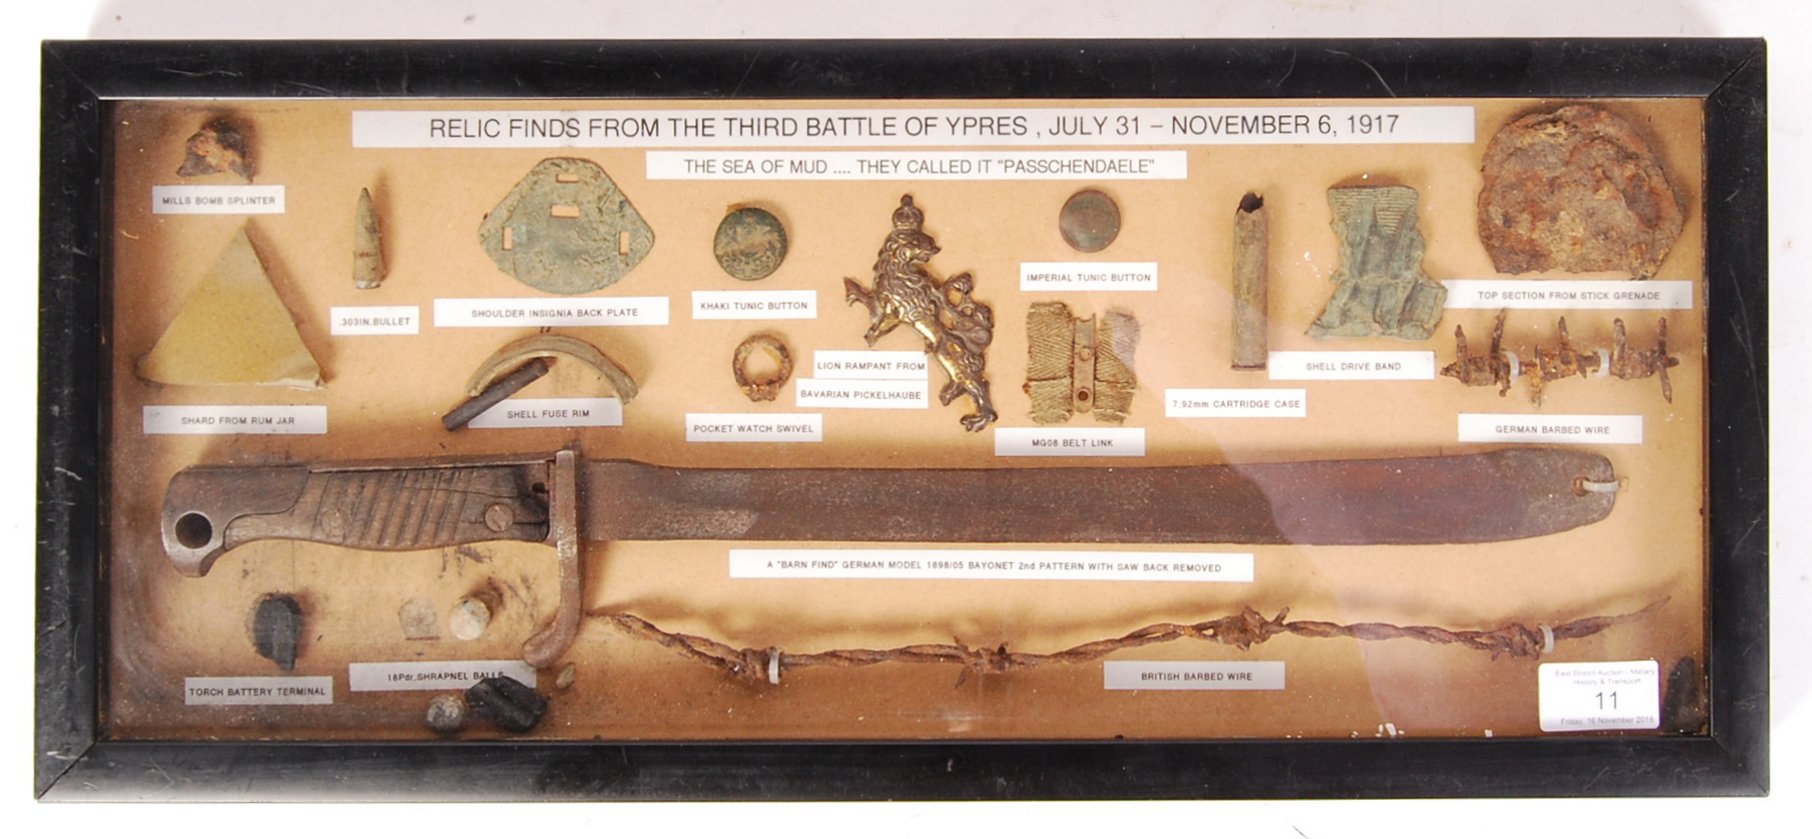 WWI FIRST WORLD WAR BATTLE OF YPRES RELIC DISPLAY